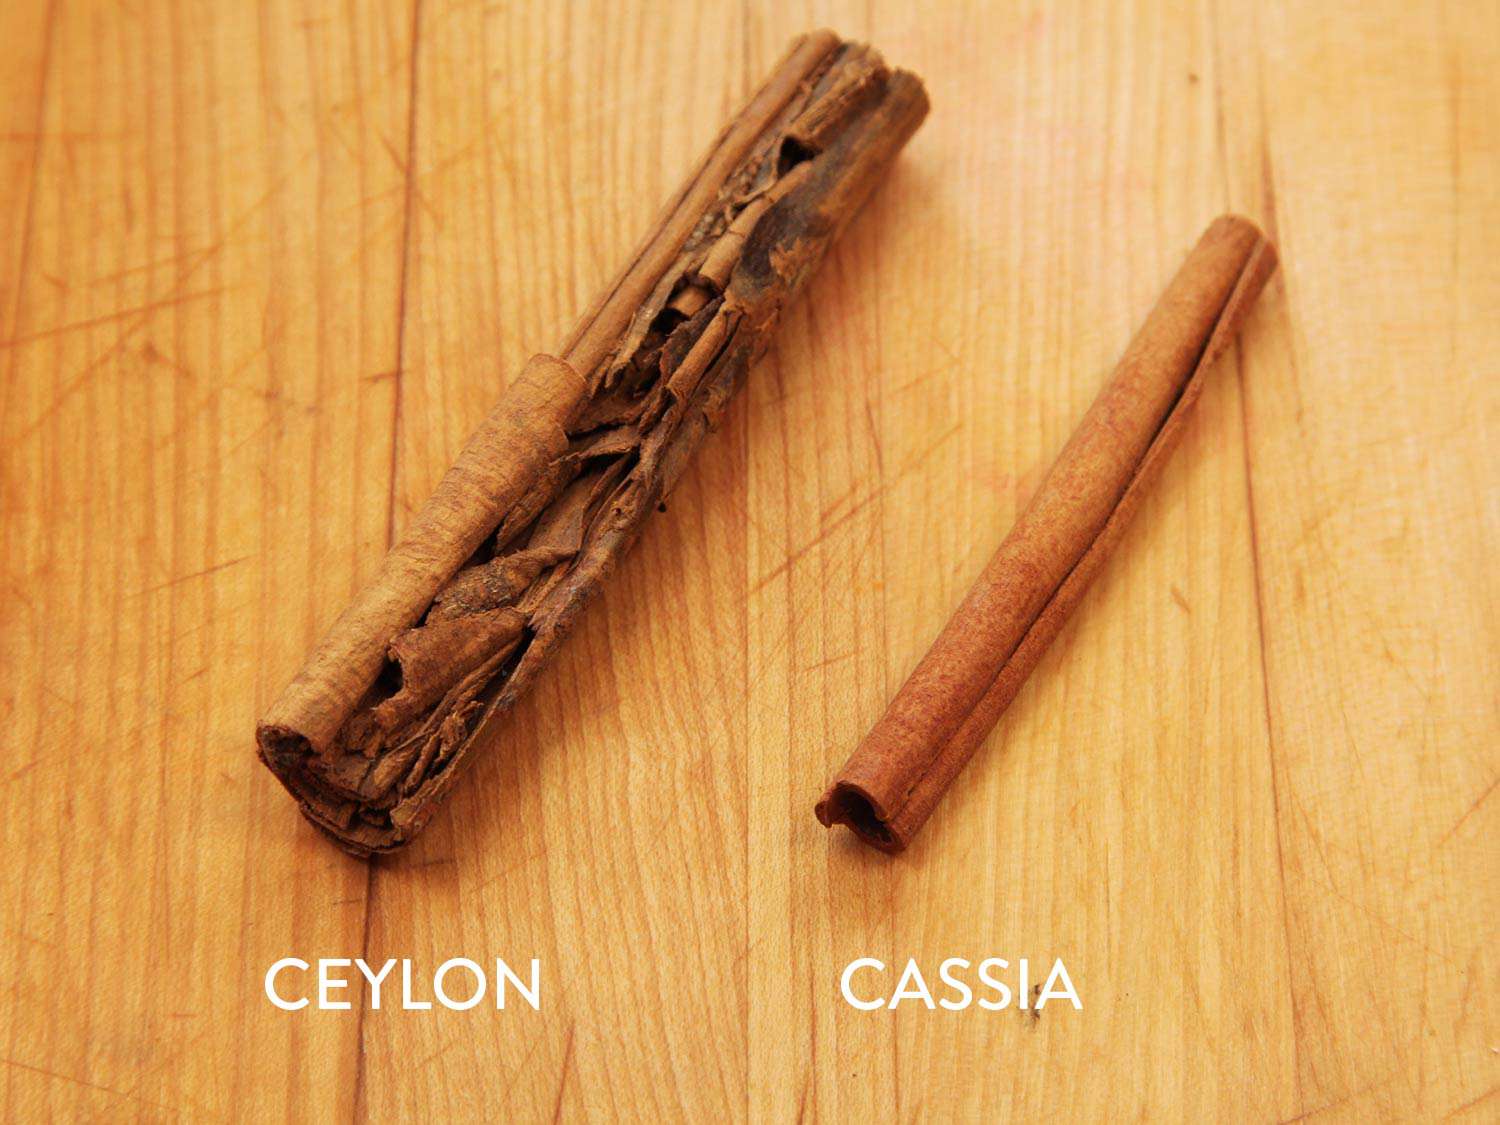 A stick of ceylon cinnamon next to a stick of cassia cinnamon. The Ceylon cinnamon is larger and a different texture.